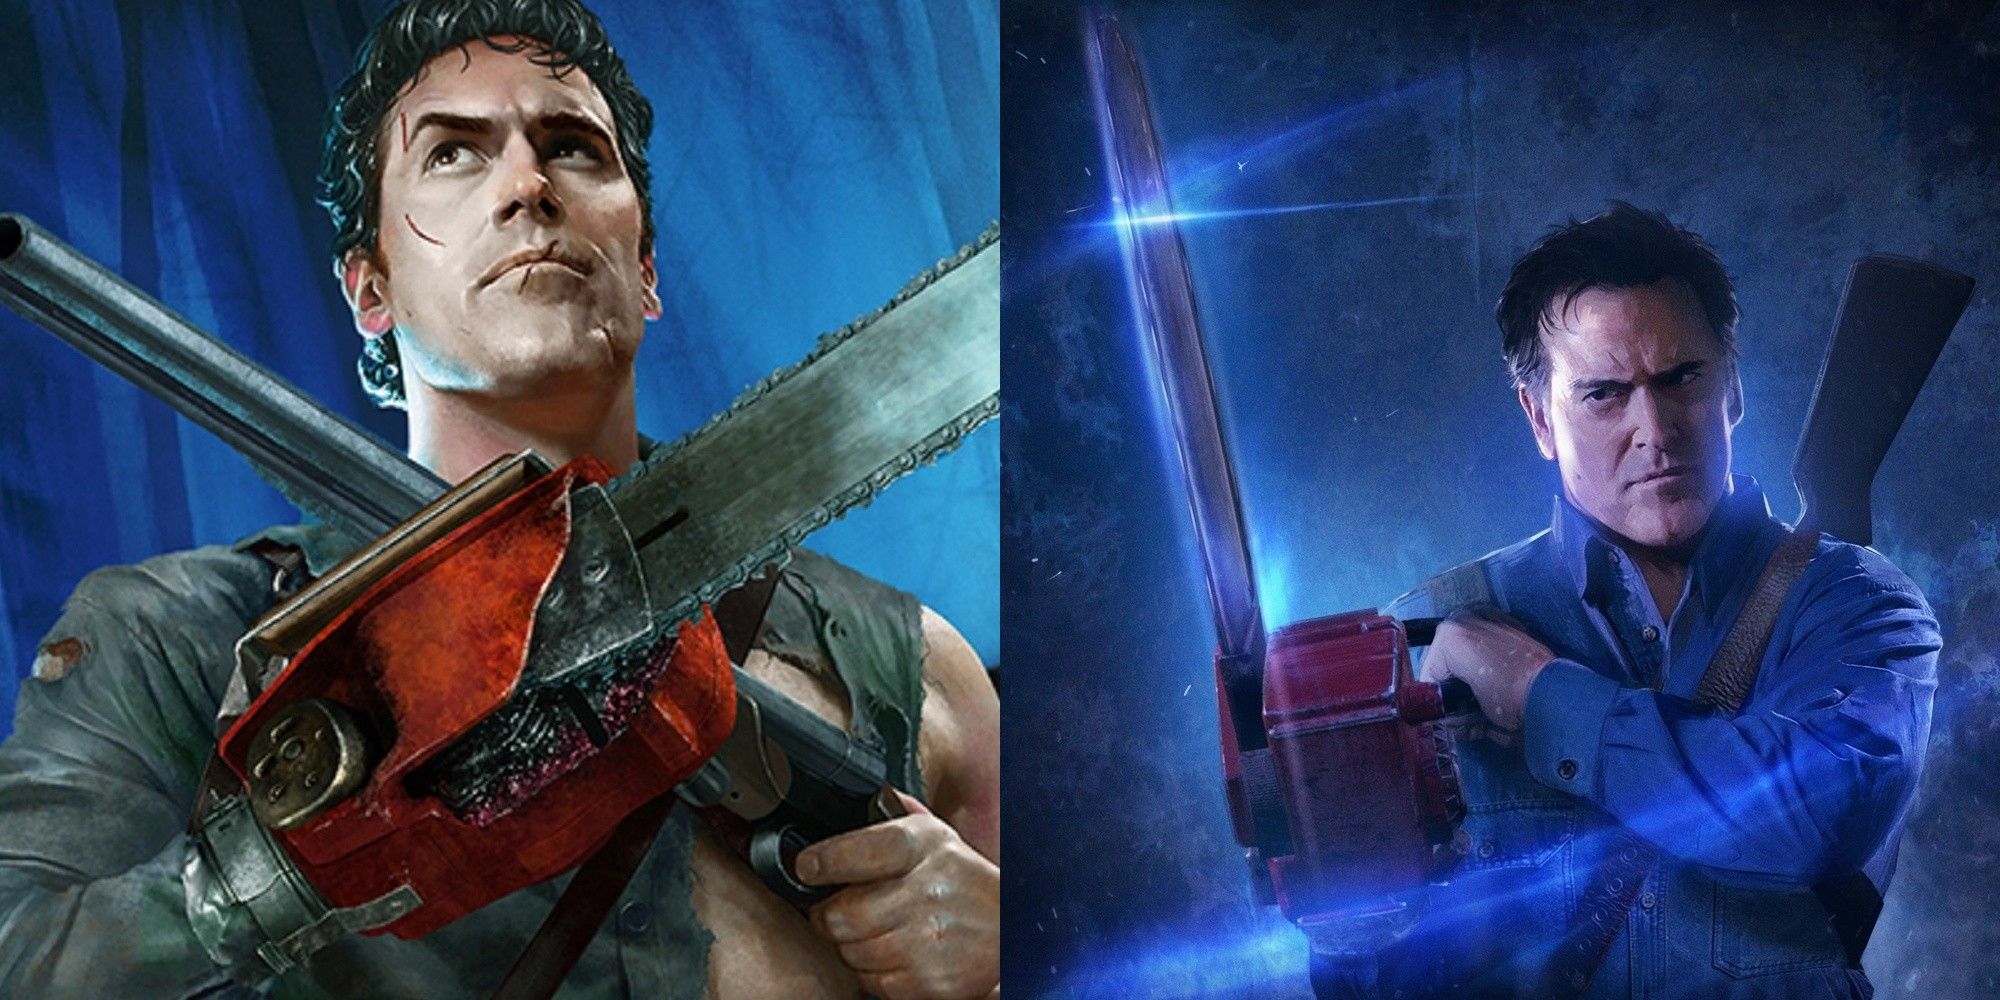 Evil Dead: The Game - Here's What We Know So Far